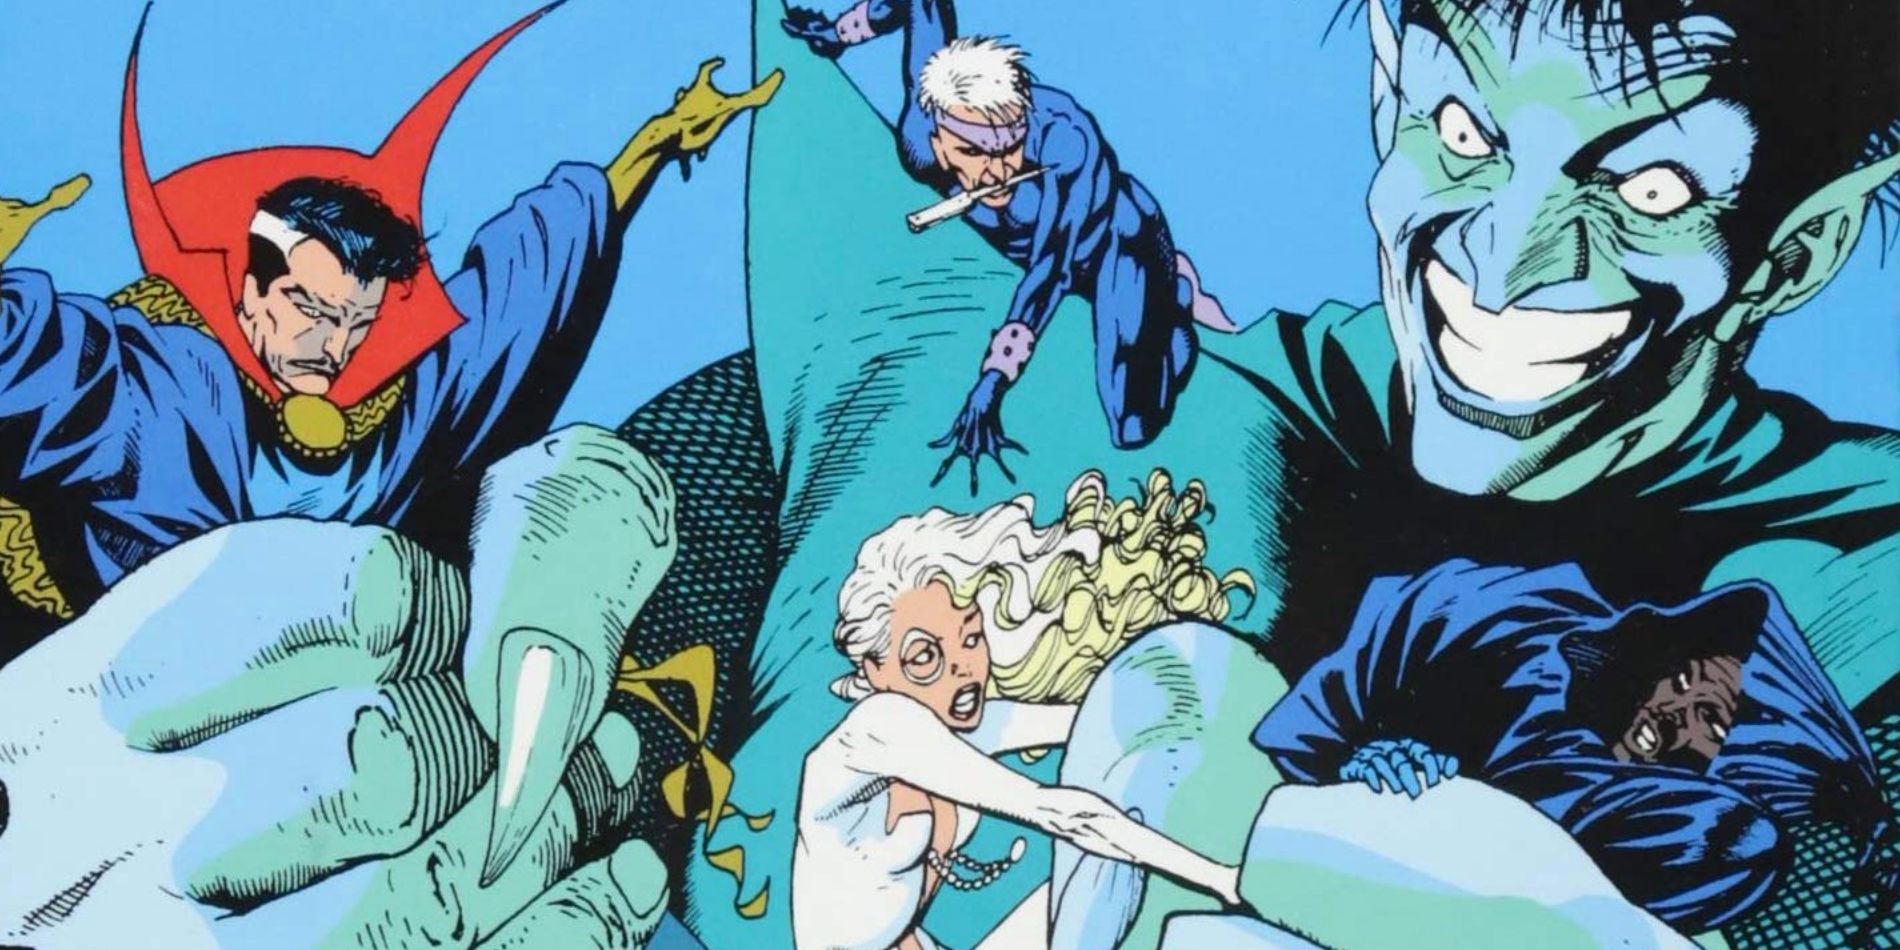 Cloak And Dagger team up with Doctor Strange against Nightmare in Marvel Comics.